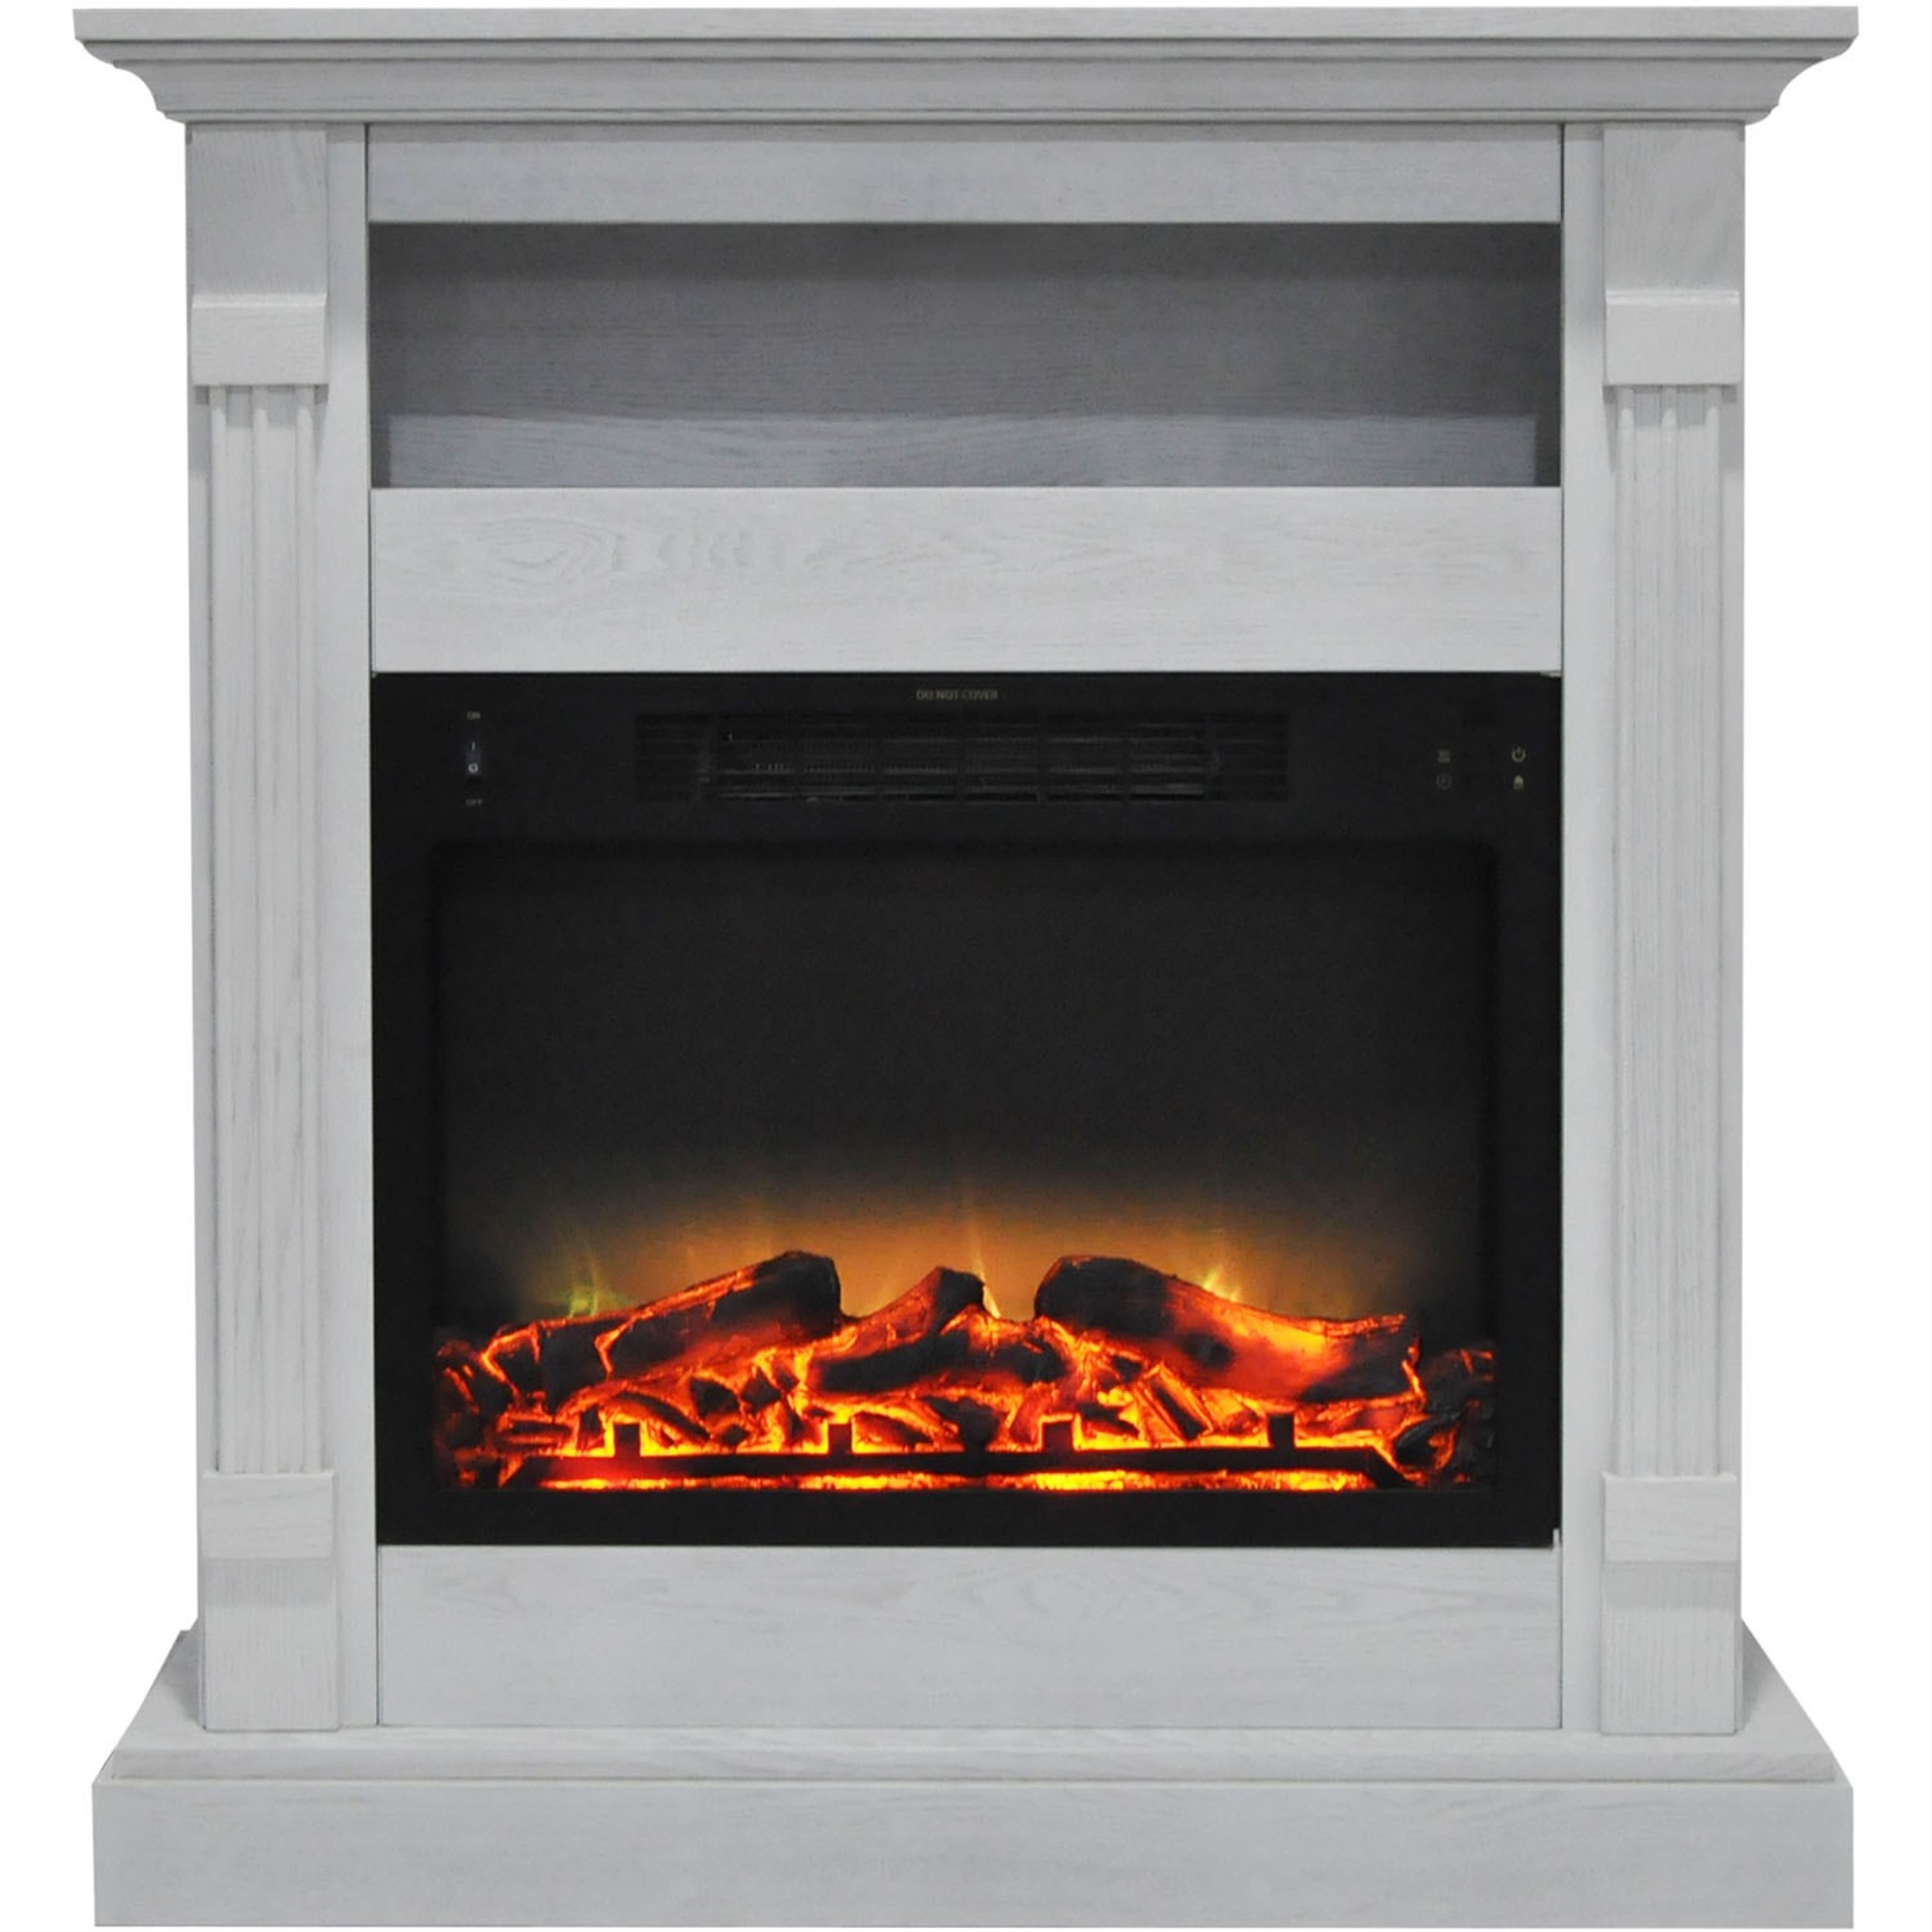 Cambridge 34 In. Electric Fireplace with Enhanced Log Display and White Mantel